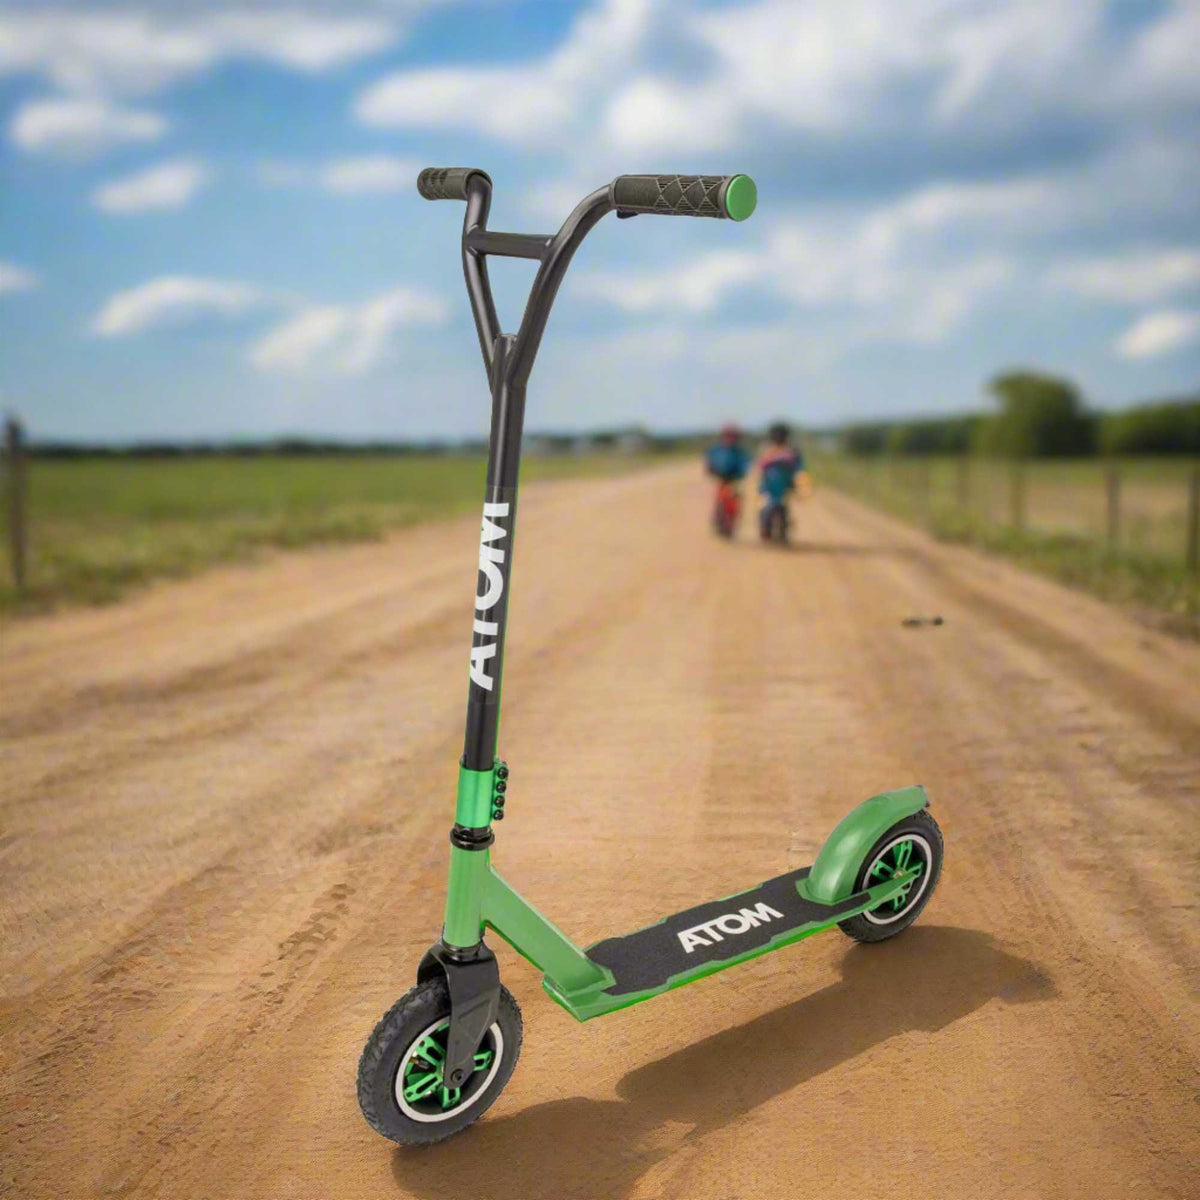 ATOM Dirt Rider Scooter in Green, durable off-road scooter designed for rugged terrains and adventurous rides